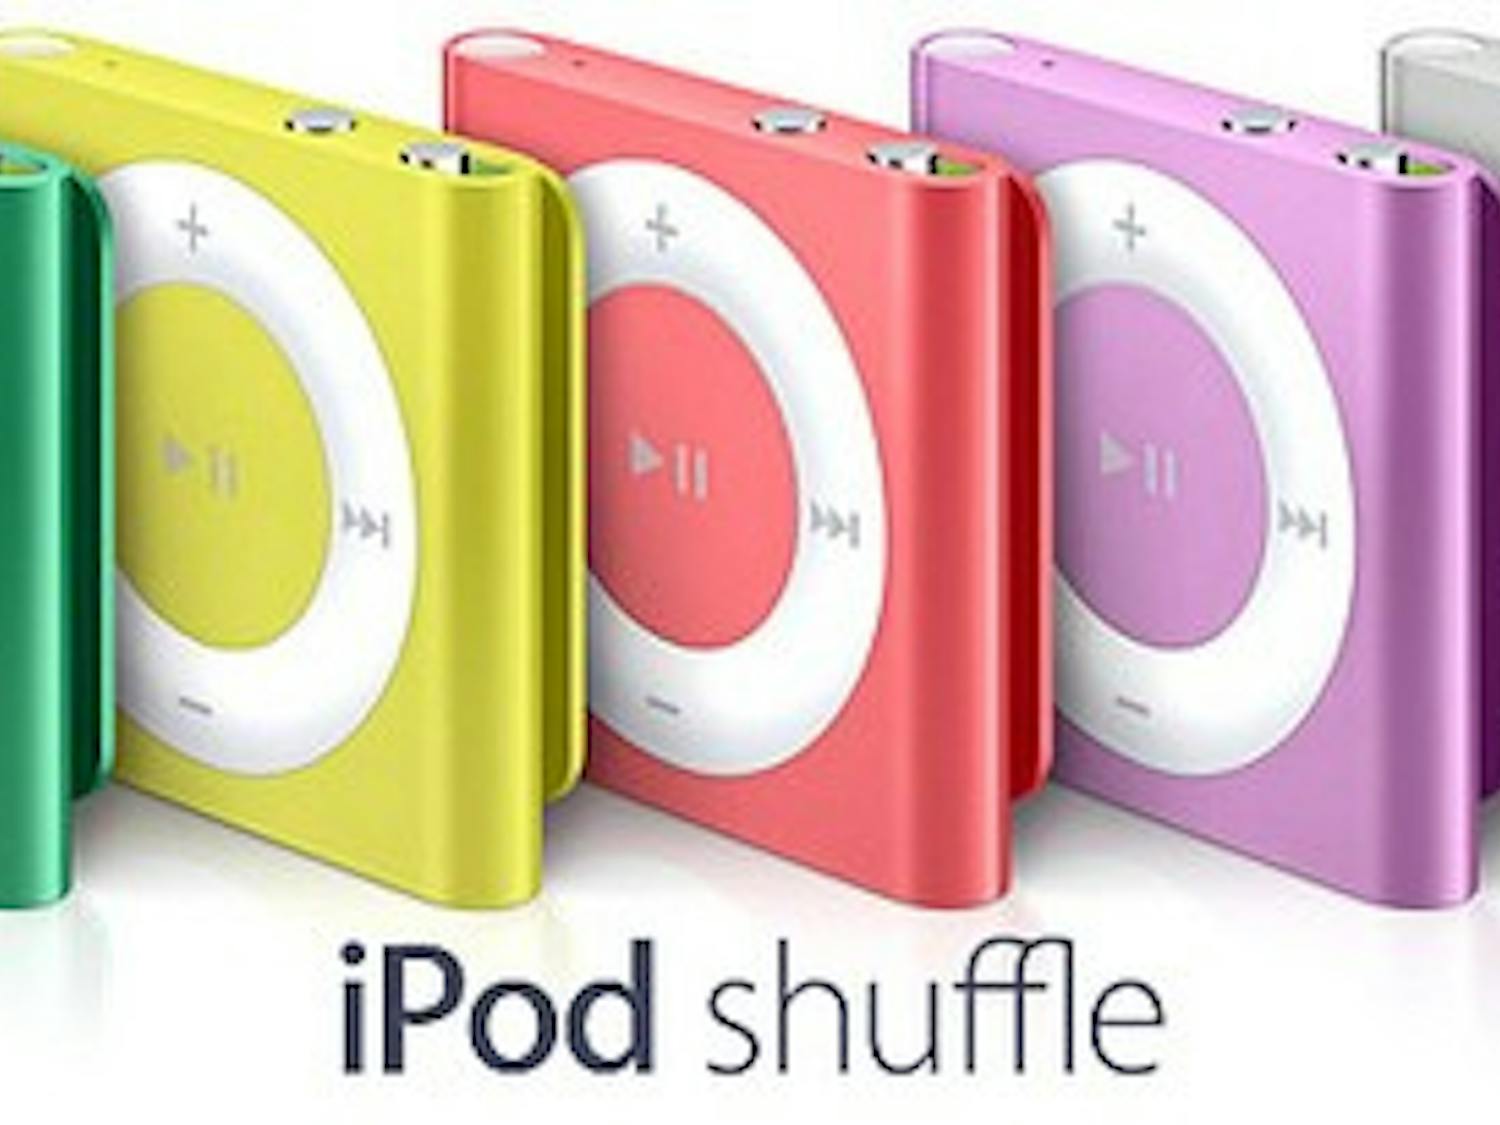 Apple has discontinued the iPod shuffle, pictured above,&nbsp;and iPod nano. (via Flickr Creative Commons user&nbsp;methodshop .com)&nbsp;